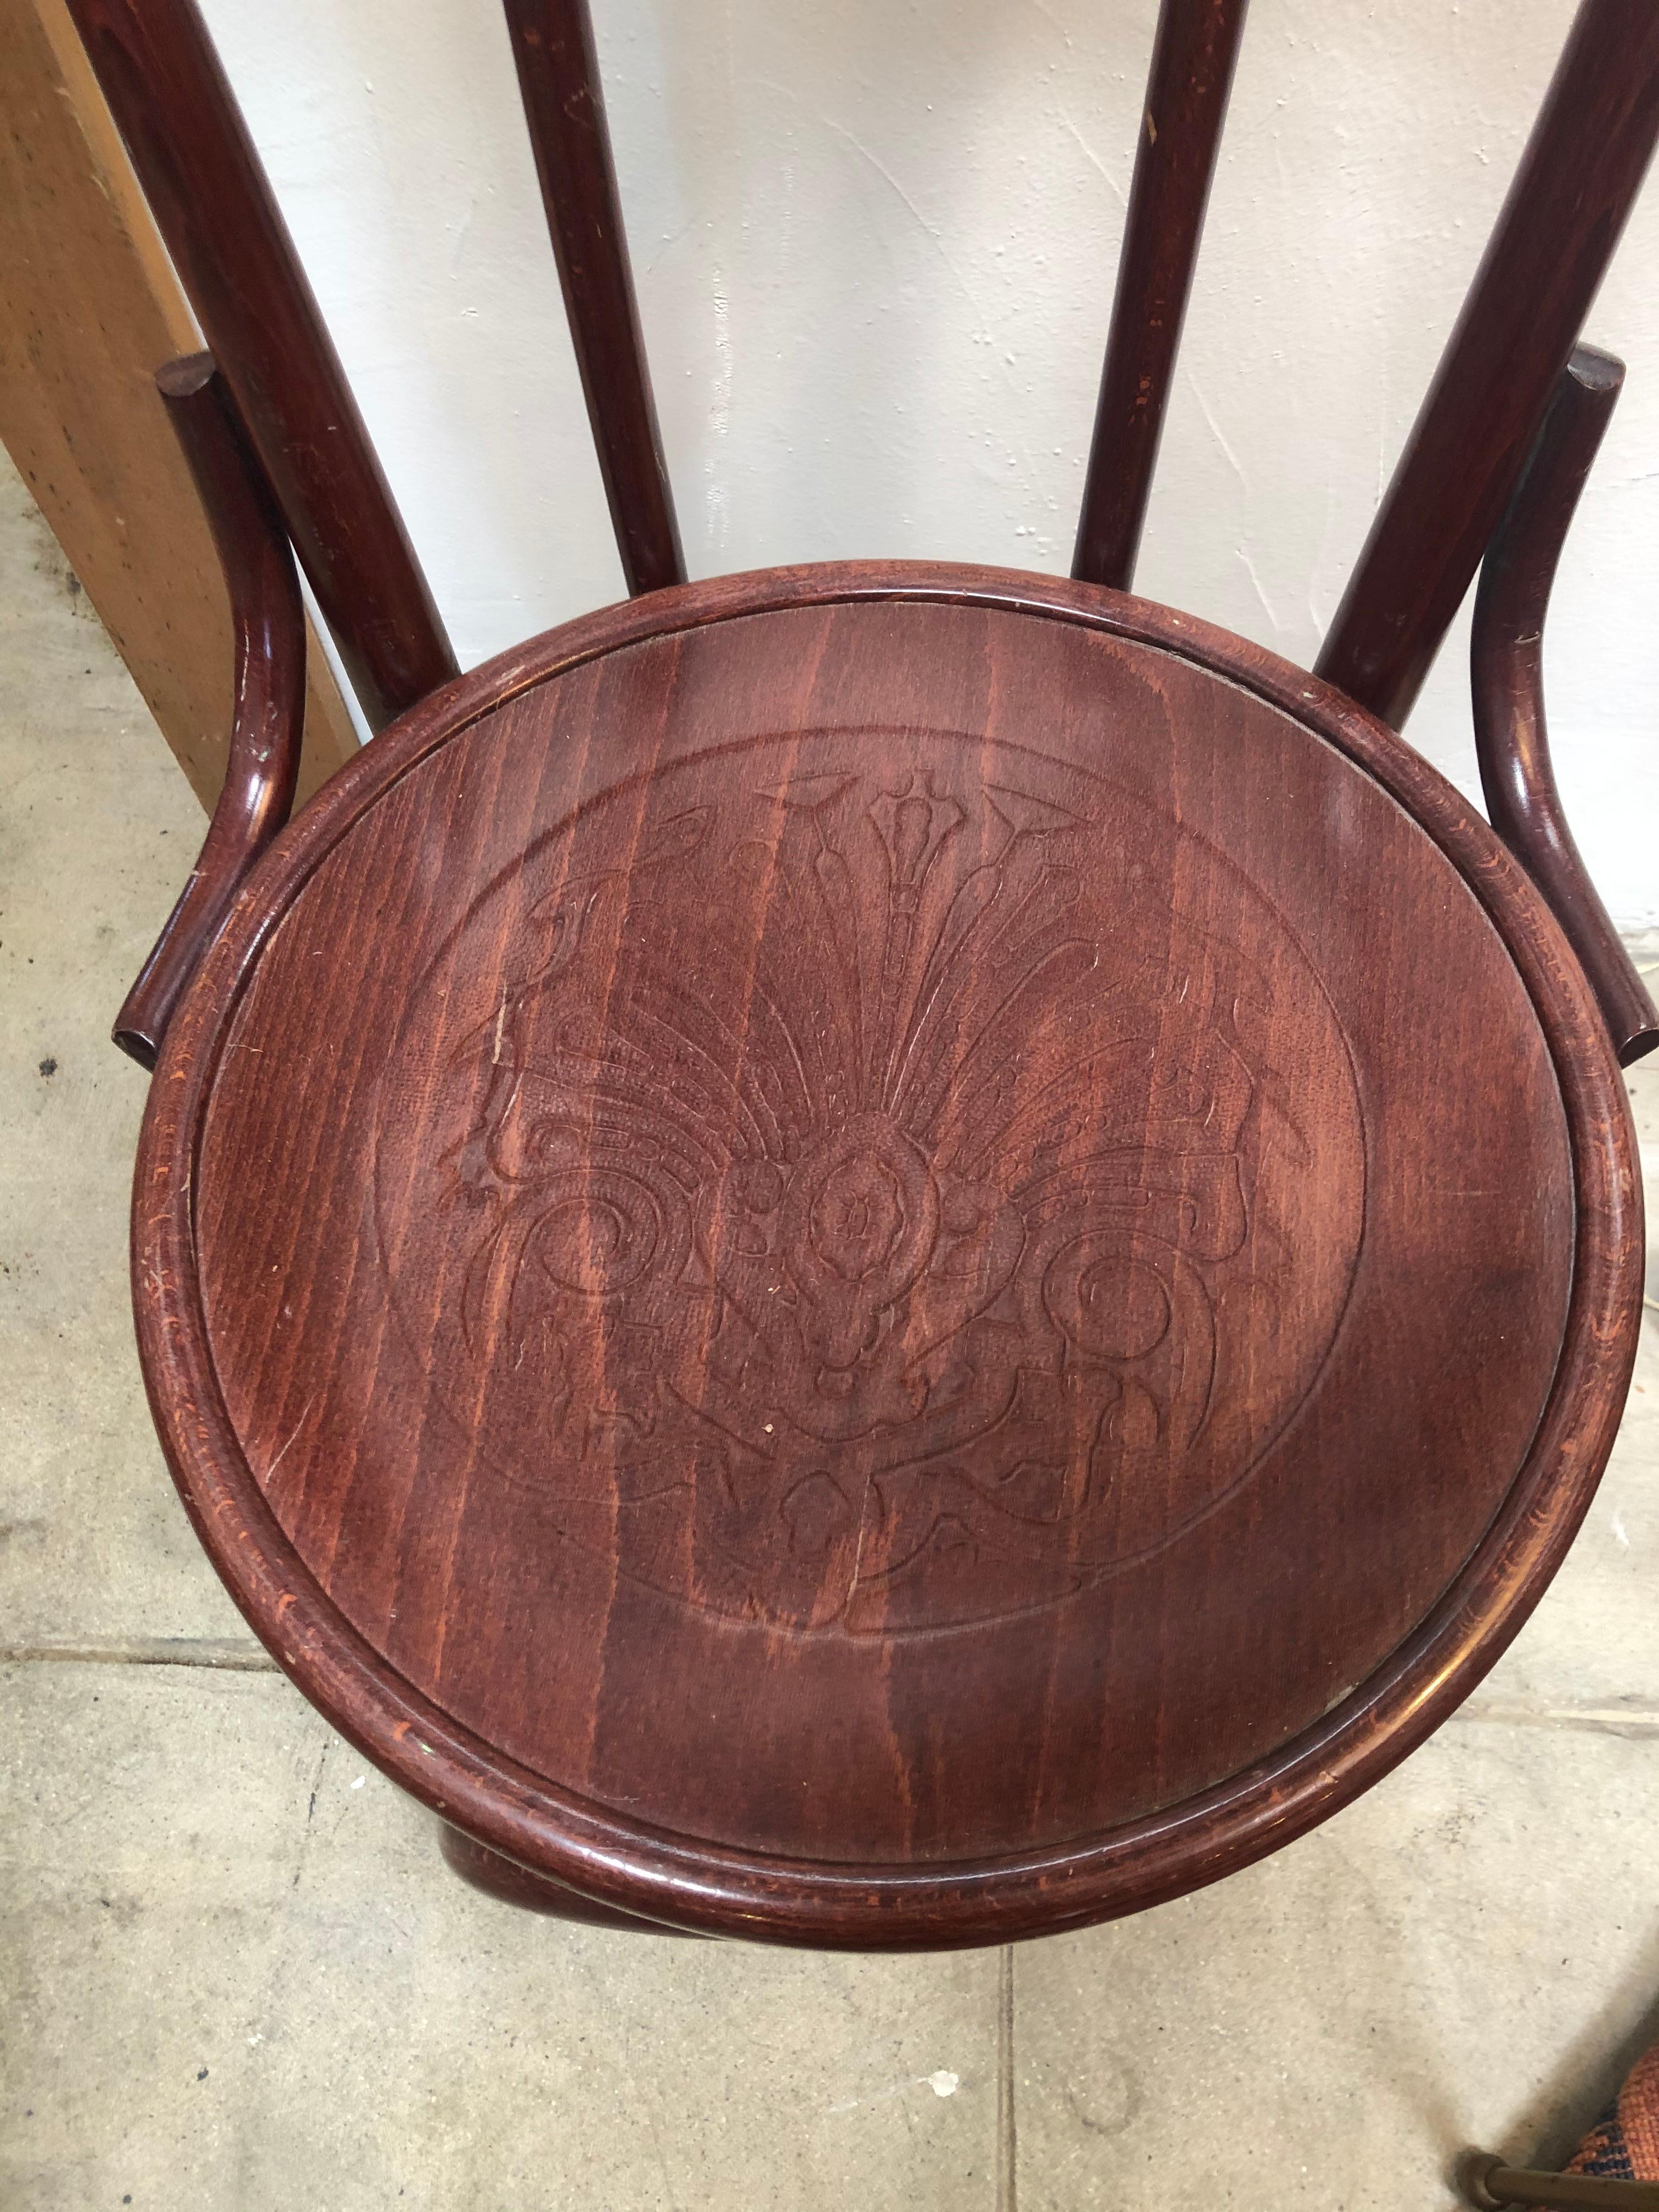 Antique bentwood chair from the early 1900s in Europe. Rose/Walnut color with ornate detail in the seat. Would work well with eclectic dining table set up or desk chair.